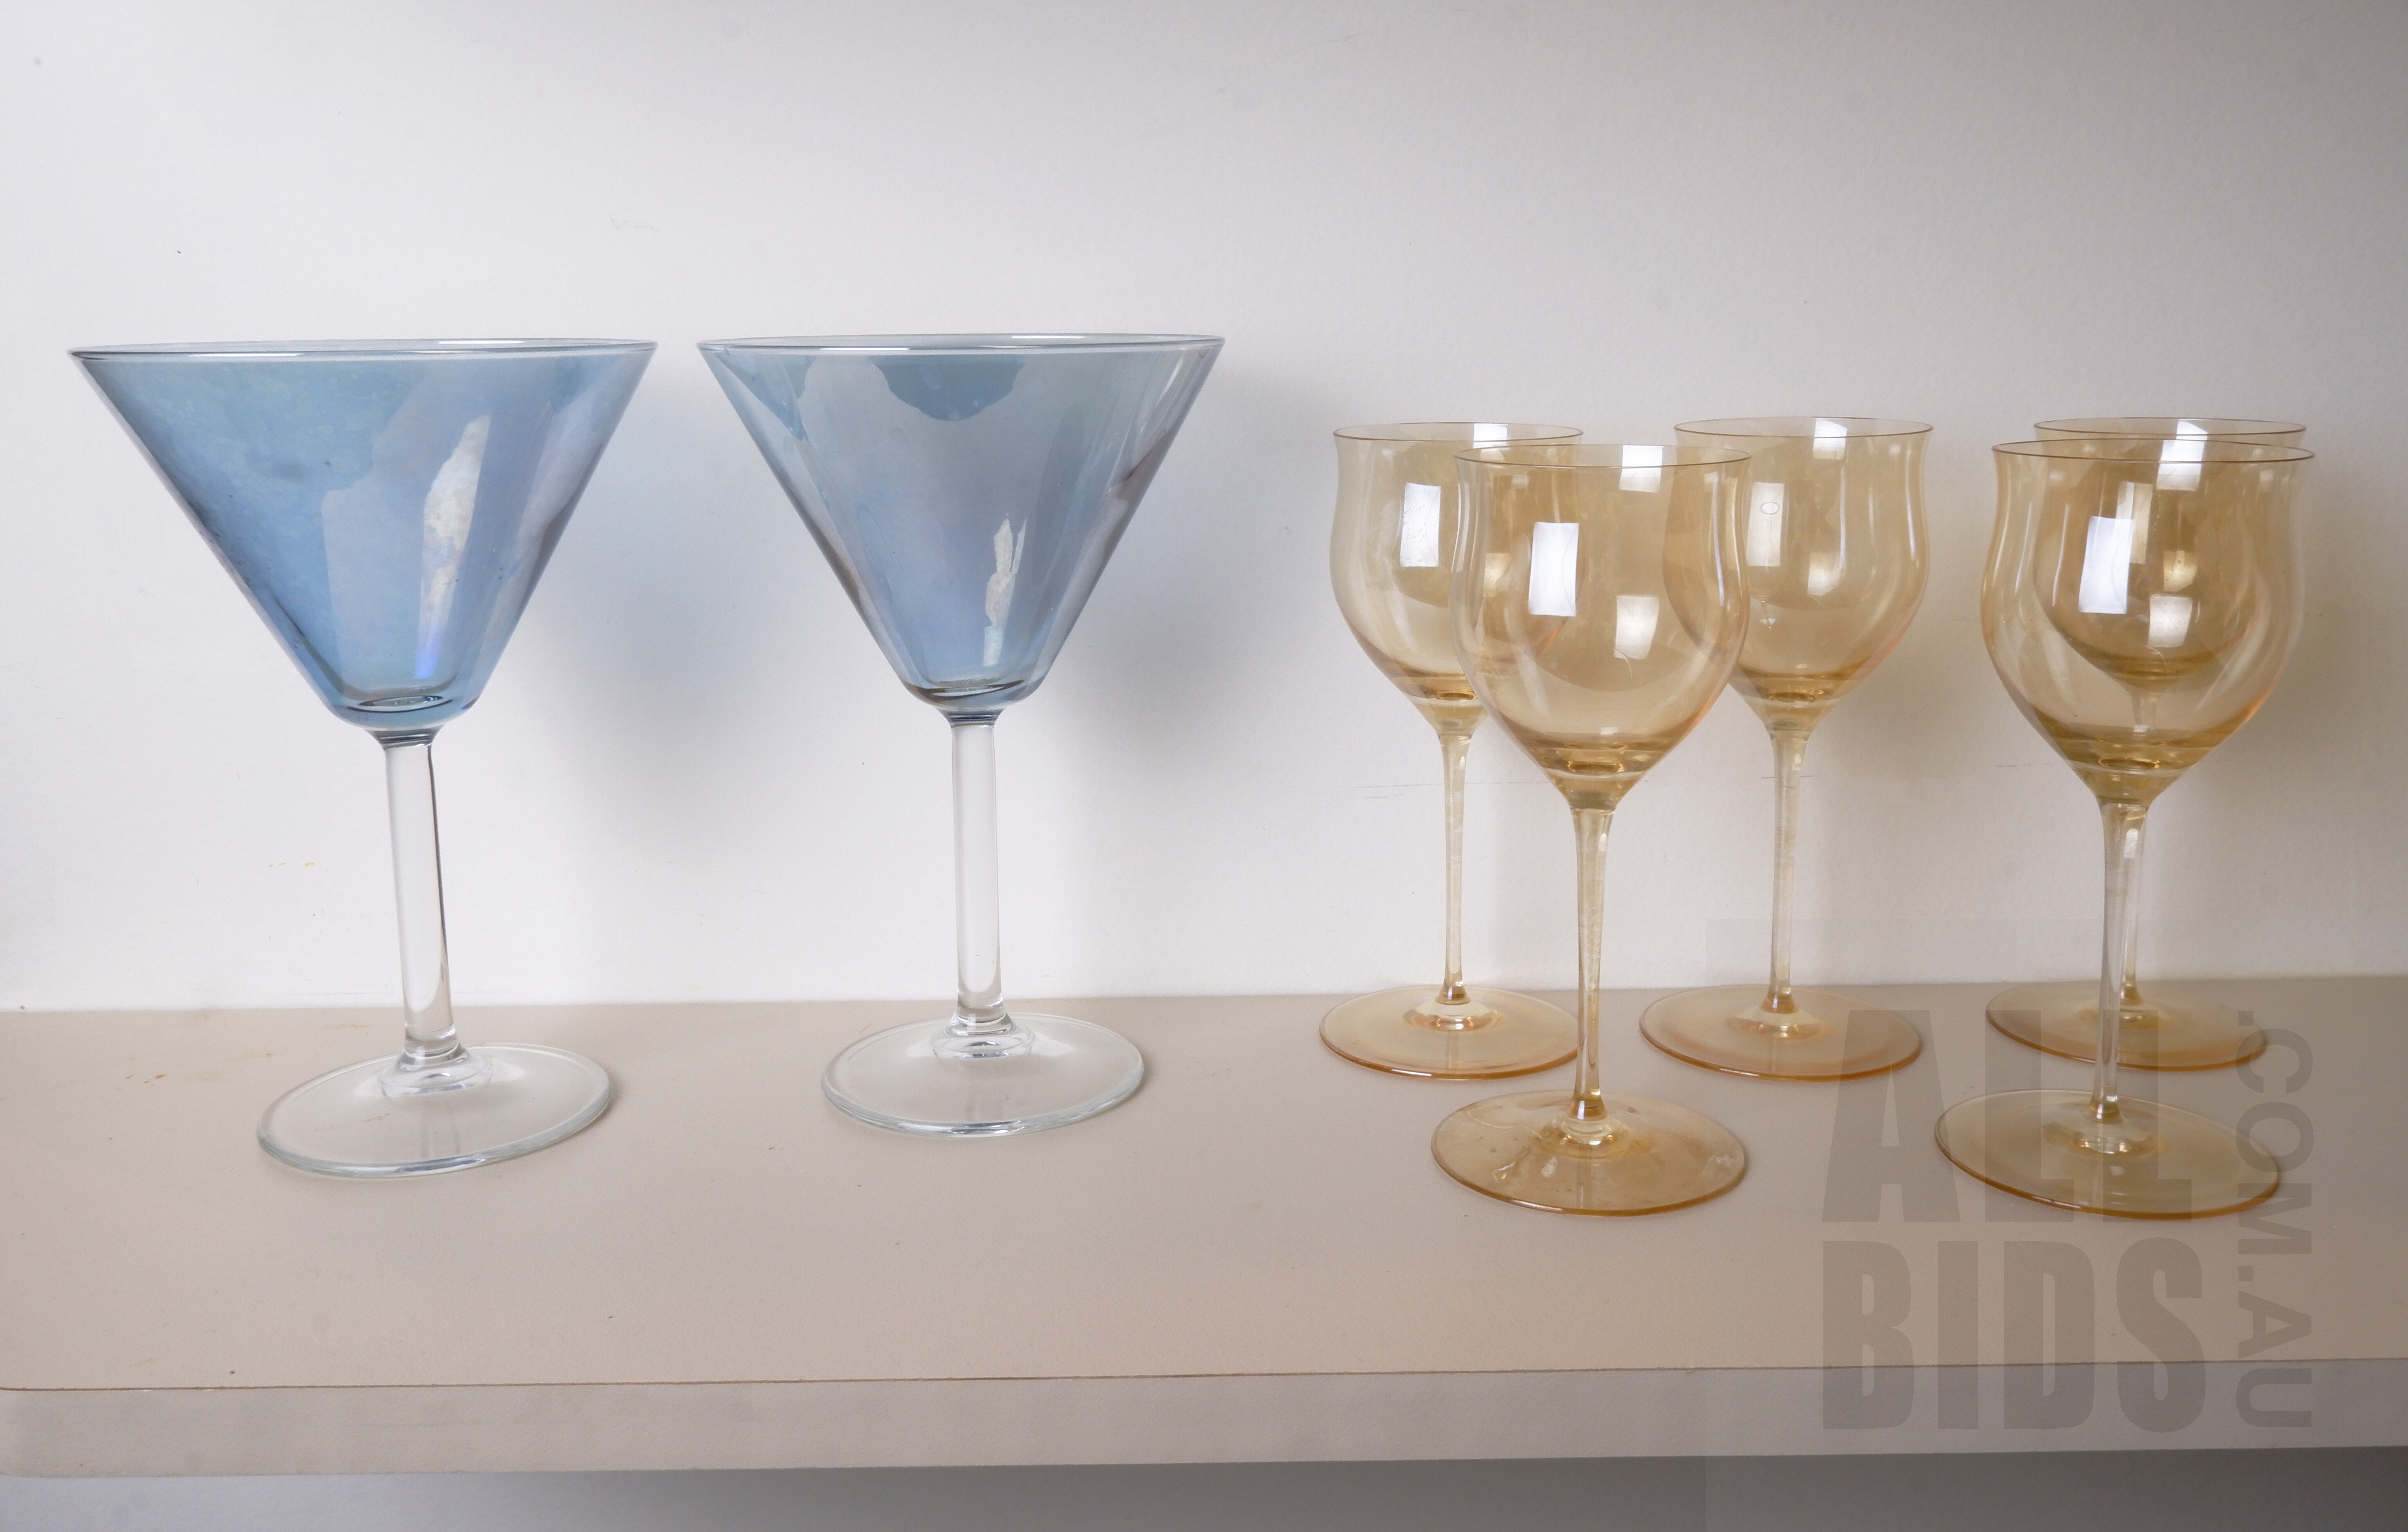 'Pair of Iridescent Glass Martini Glasses with Five Very Fine Iridescent Wine Glasses'